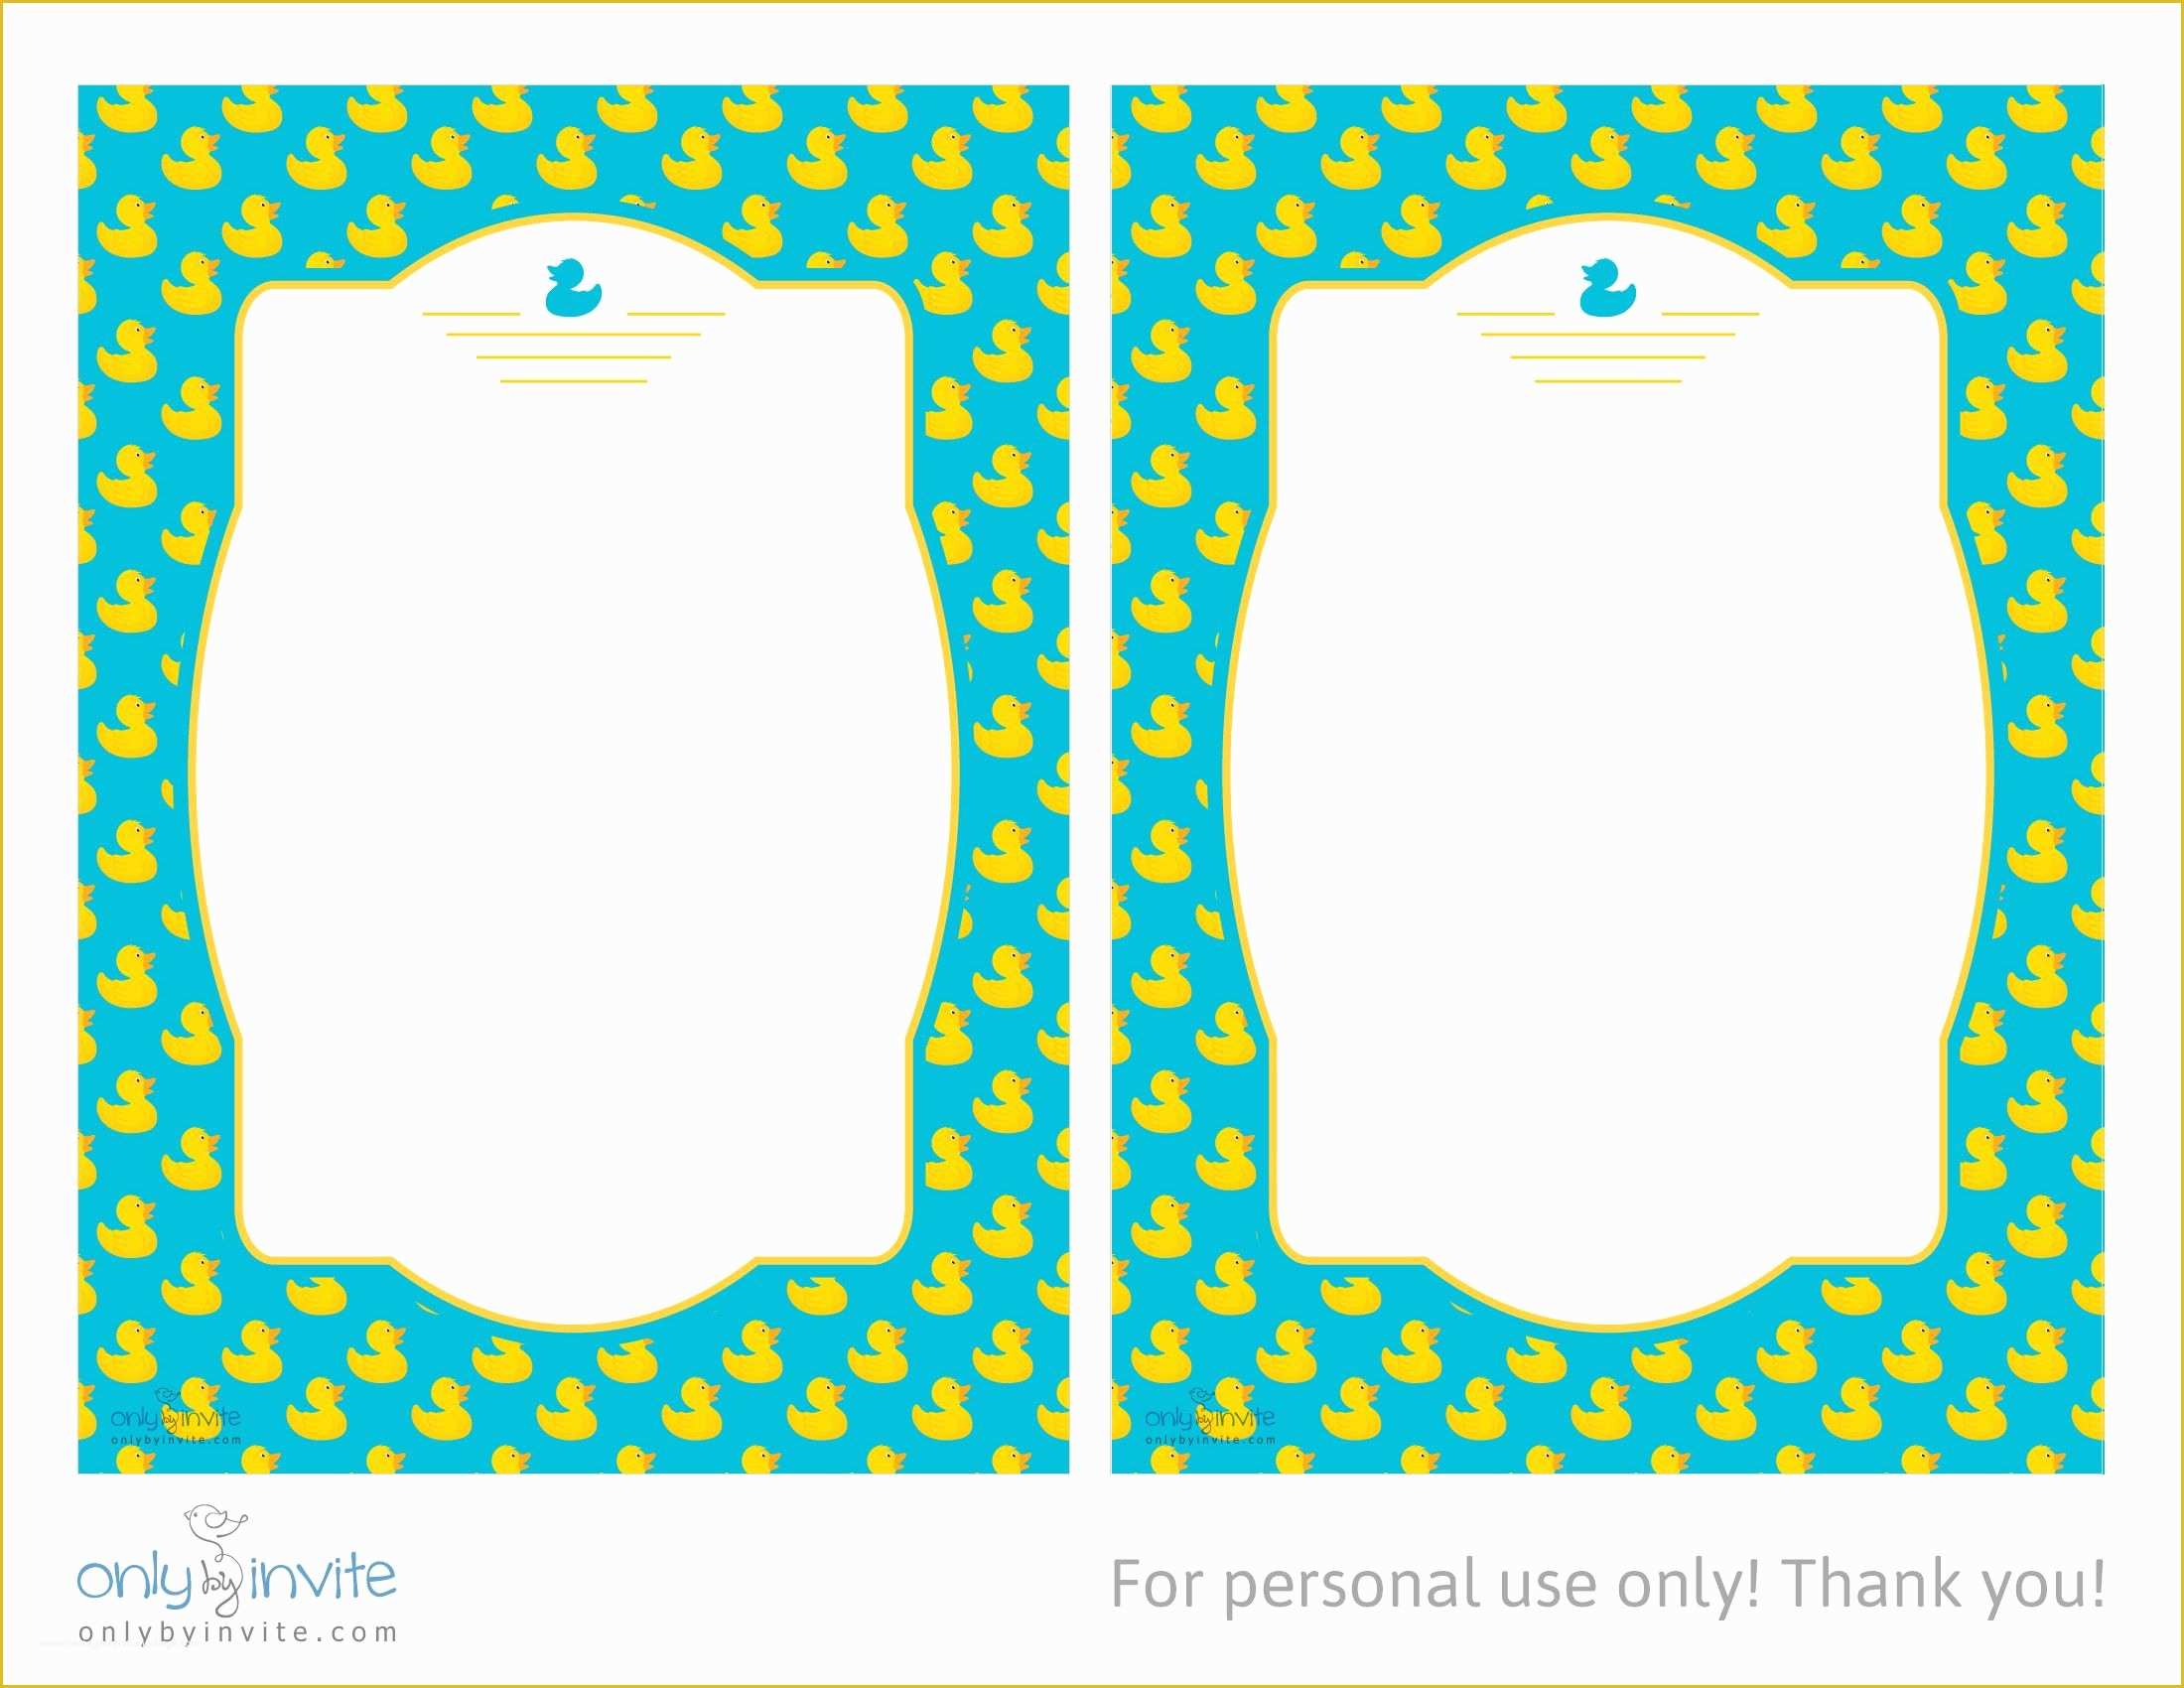 Rubber Ducky Baby Shower Invitations Template Free Of Tropical Printable Rubber Ducky Baby Shower Invitations